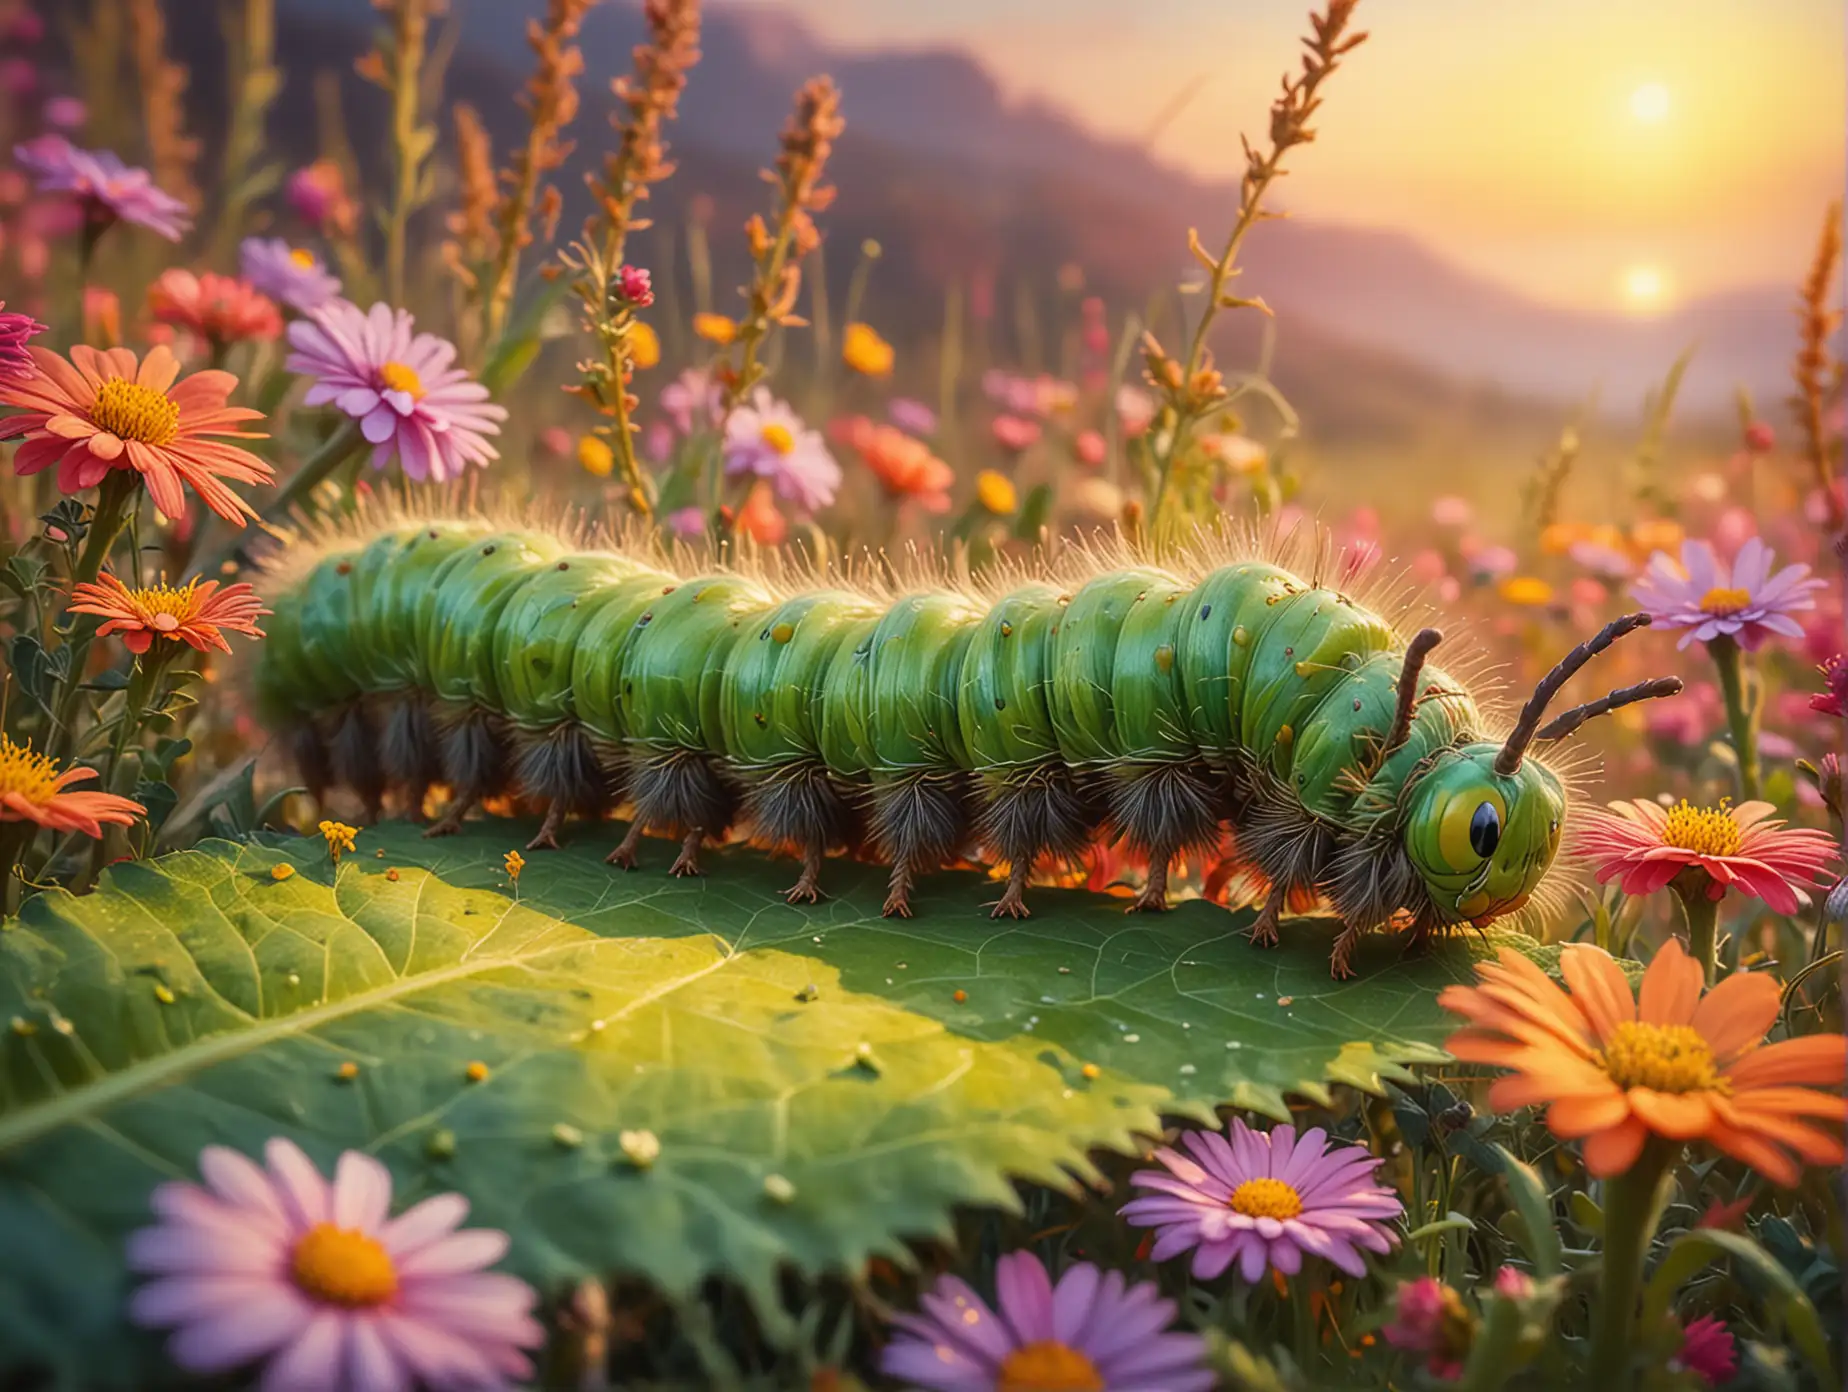 Green Caterpillar Crawling on Colorful Meadow Leaf at Sunset